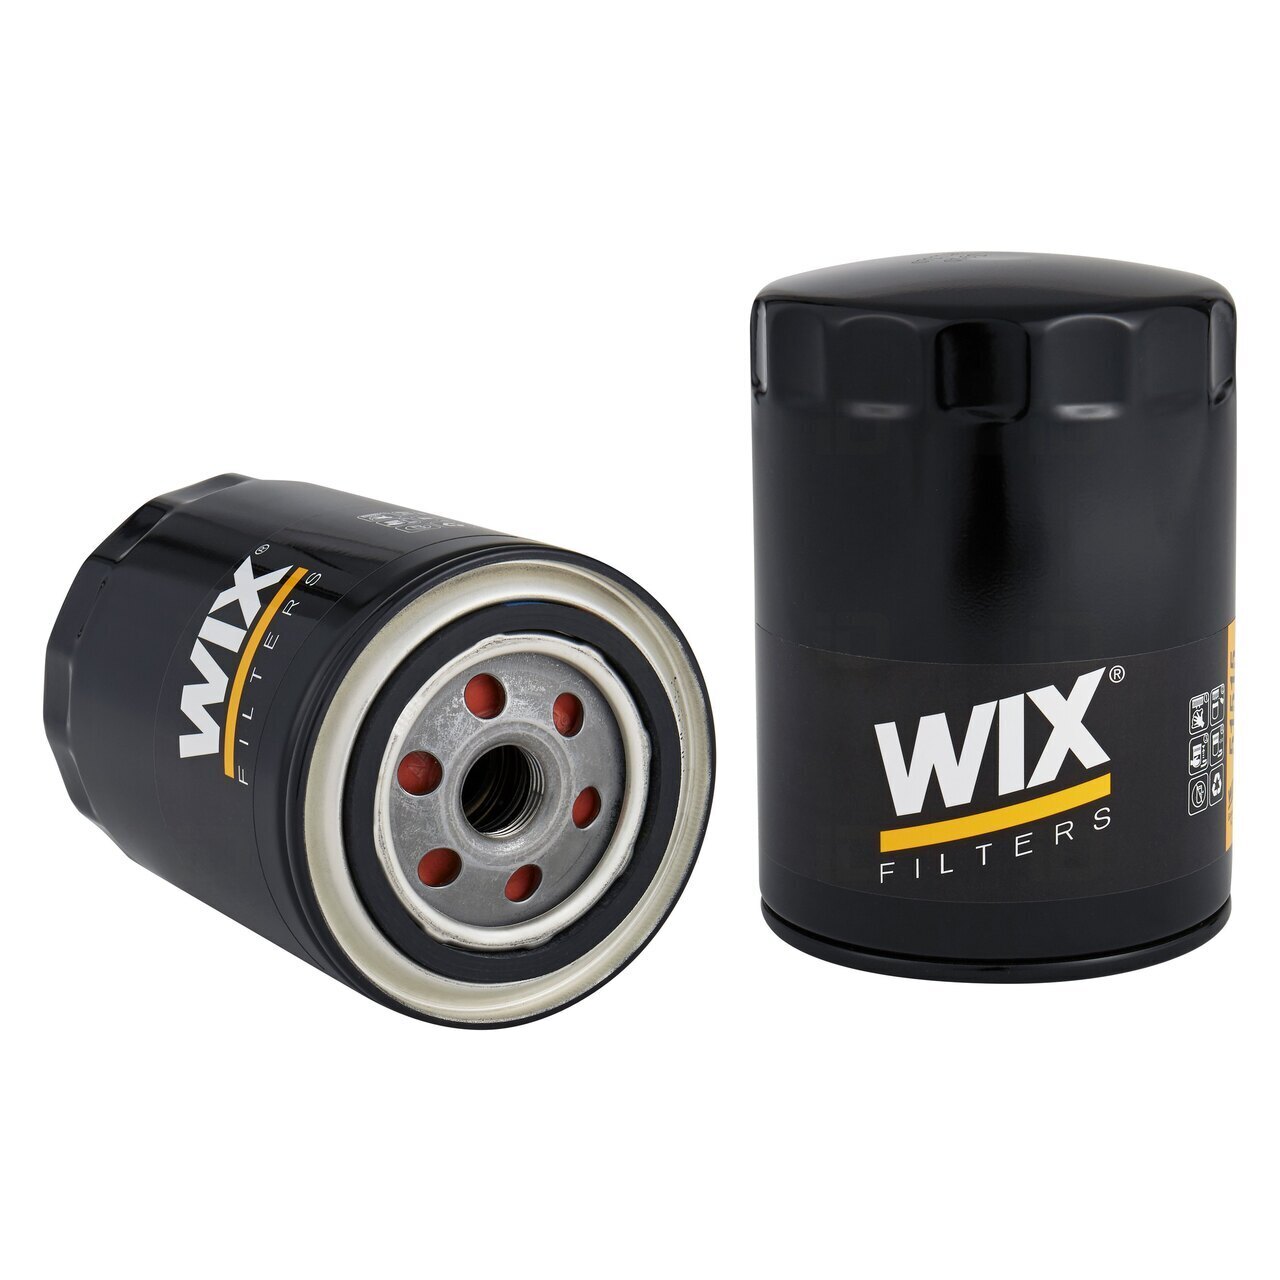 WIX Filters 42116 Air Filter Pack of 1 